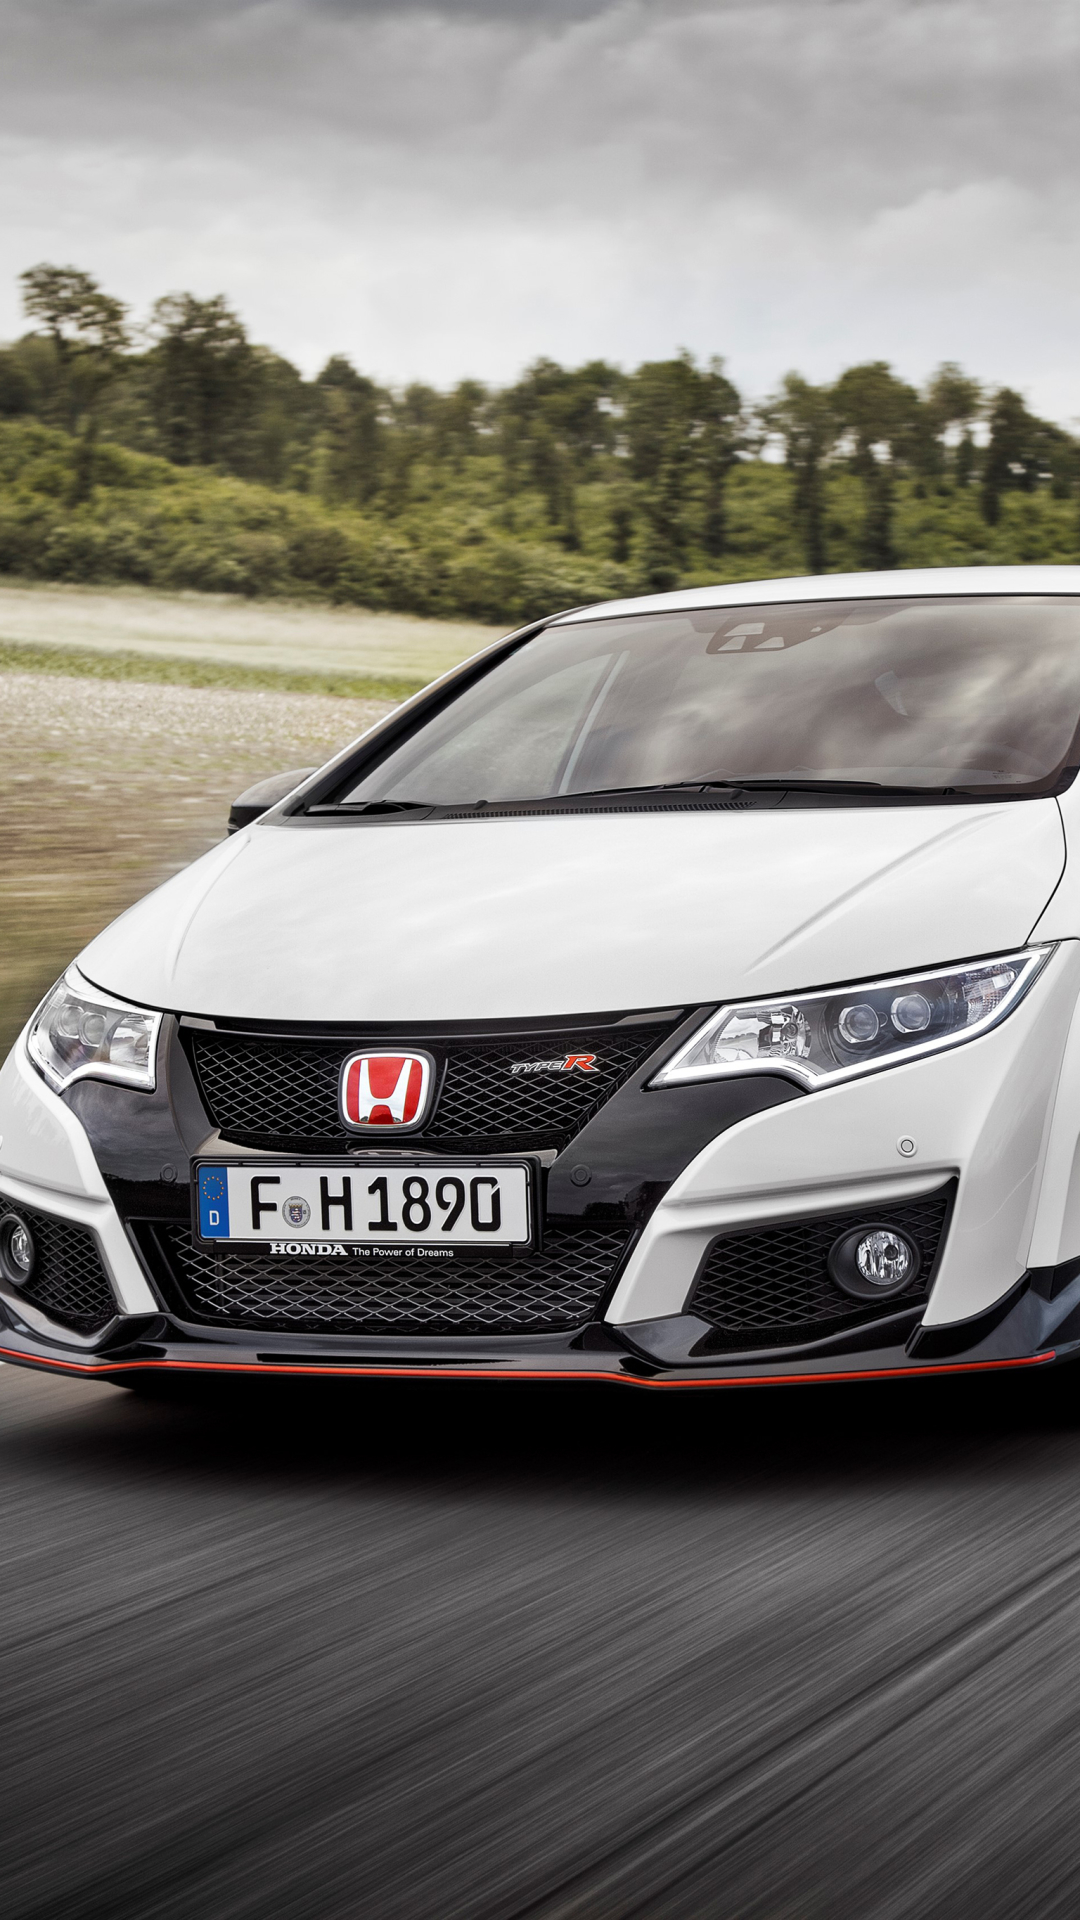 Honda Type R Wallpapers Apk Download for Android Latest version 200  gorapphondacivictyperwallpaper